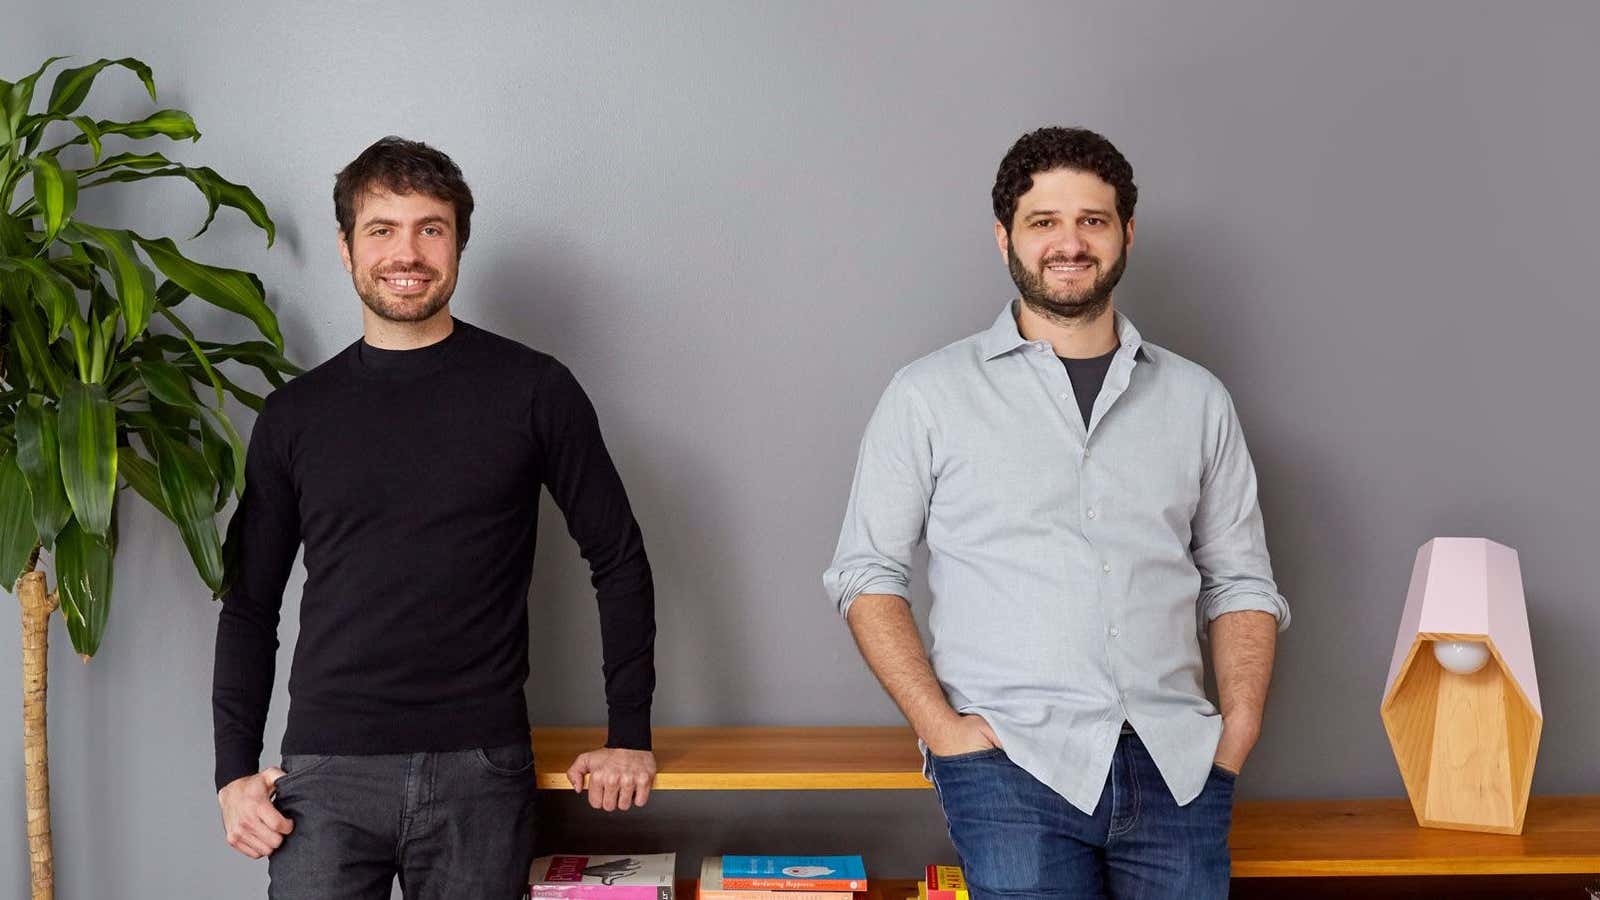 From colleagues to cofounders.